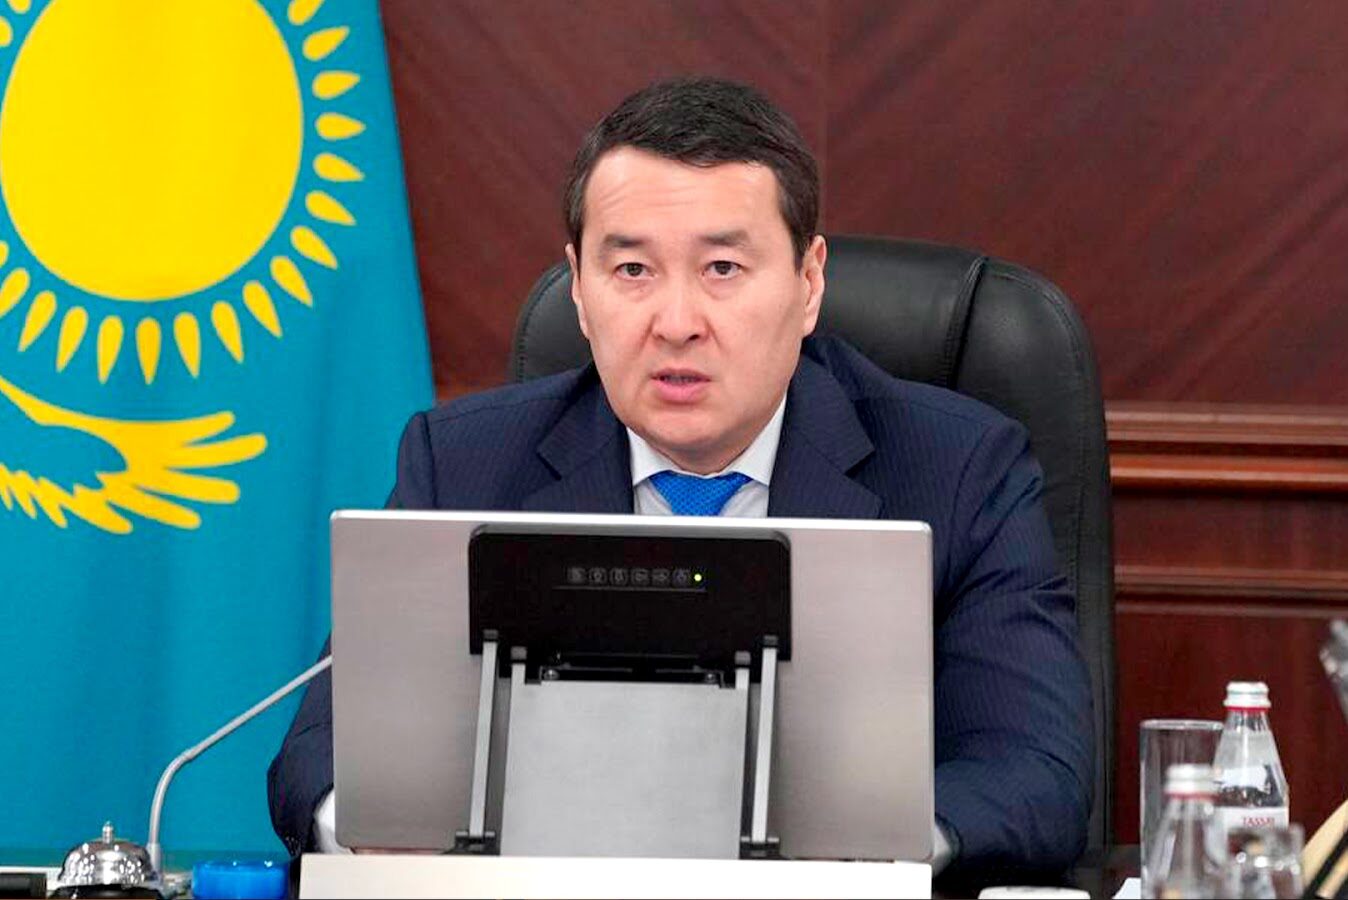 An information system in the field of geology and subsoil use will be created in Kazakhstan